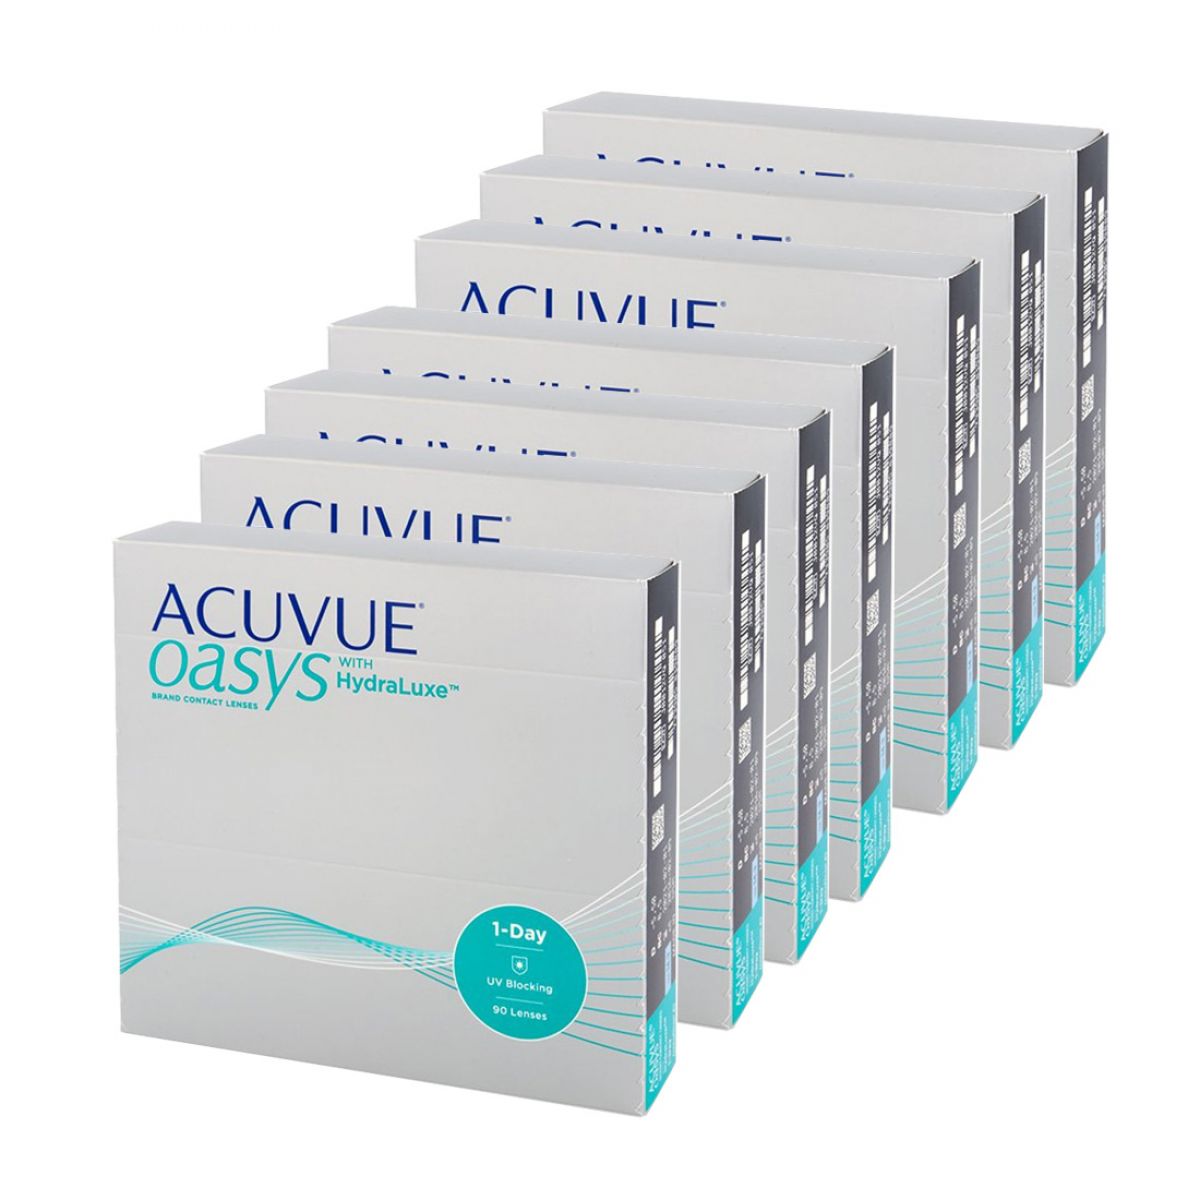 ACUVUE OASYS 1DAY 12 MONTHS SUPPLY (720 LENSES)